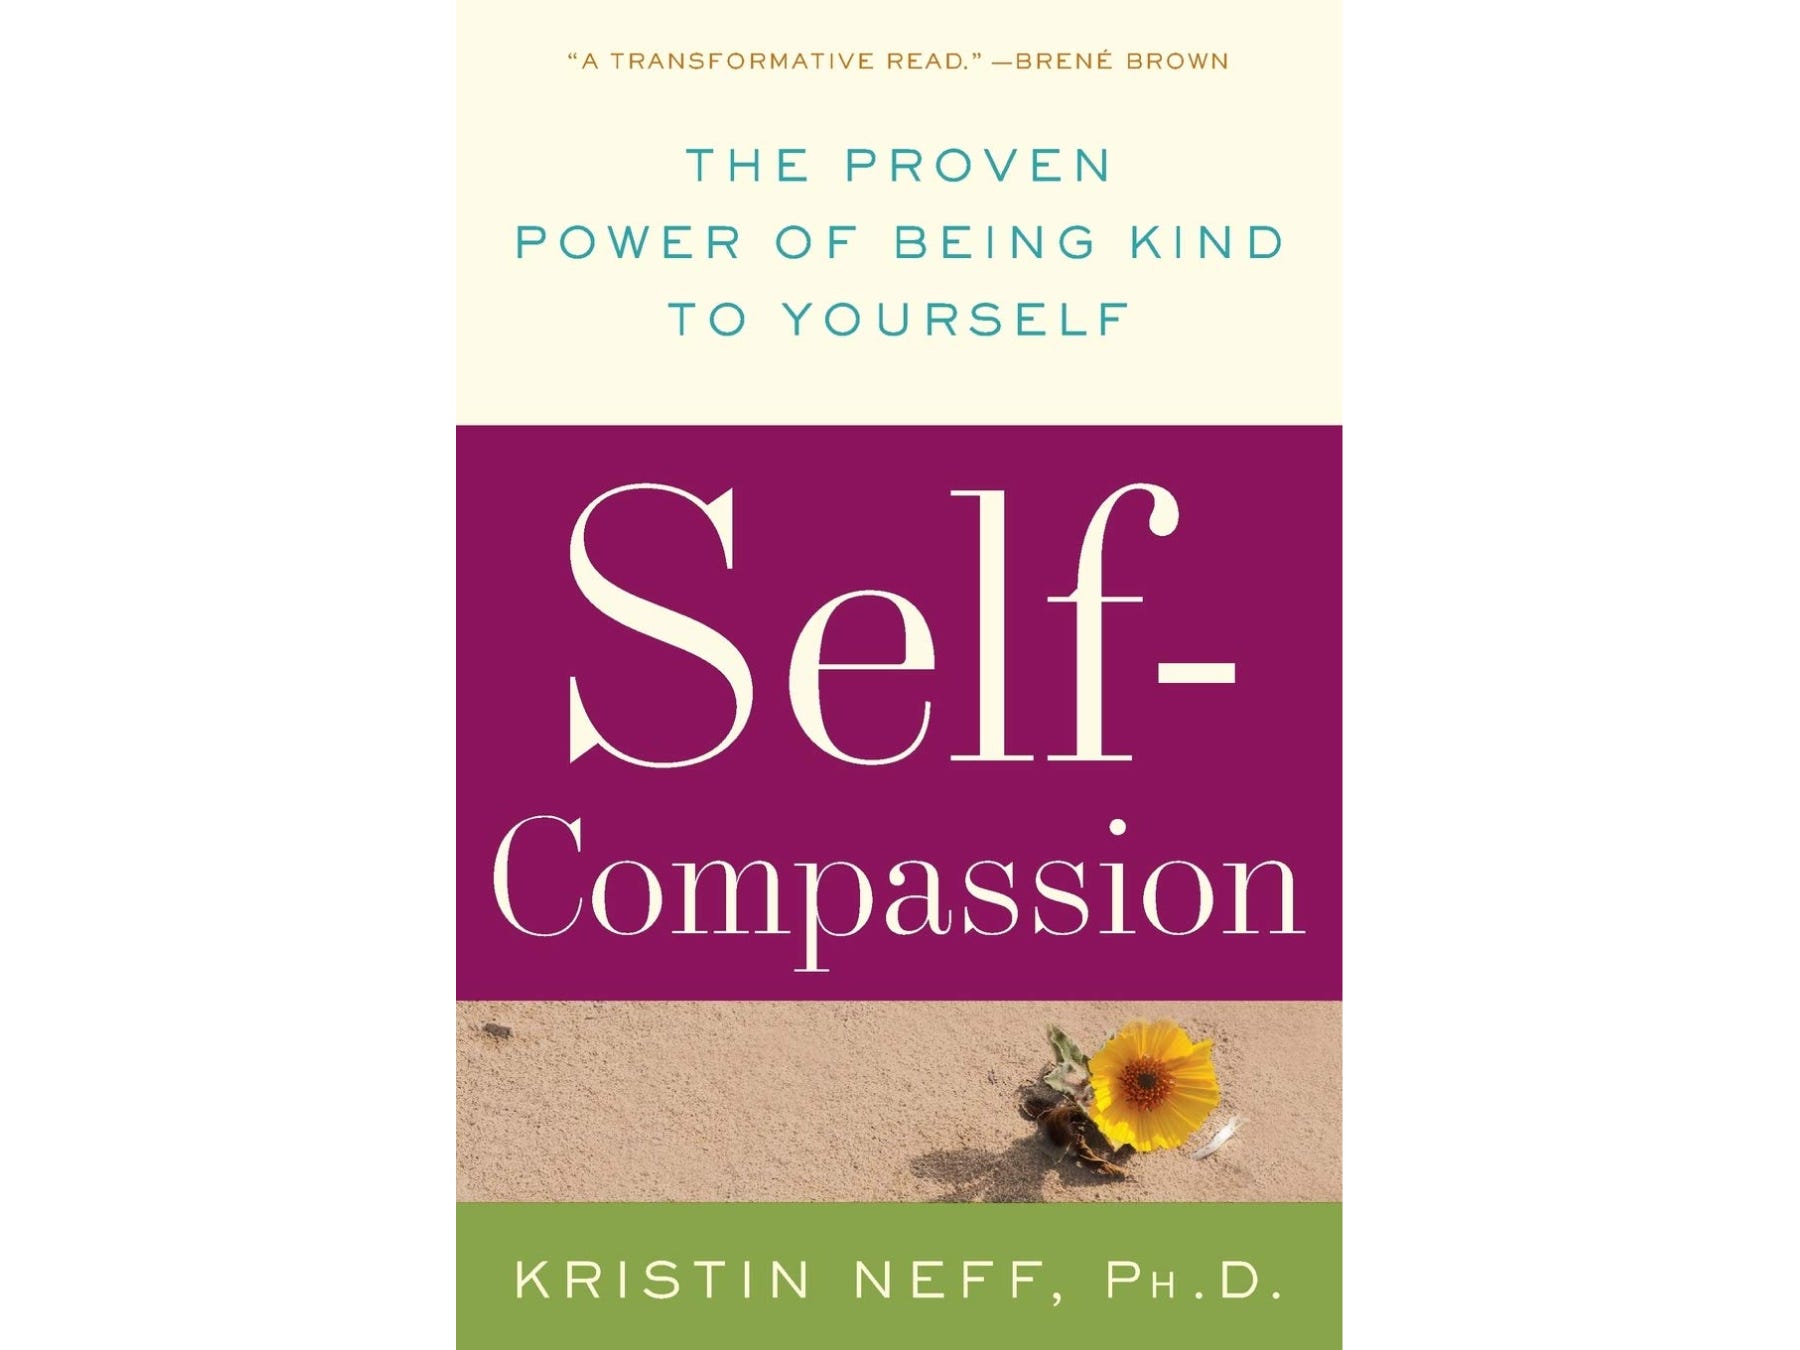 Self-Compassion: The Proven Power of Being Kind to Yourself by Kristin Neff